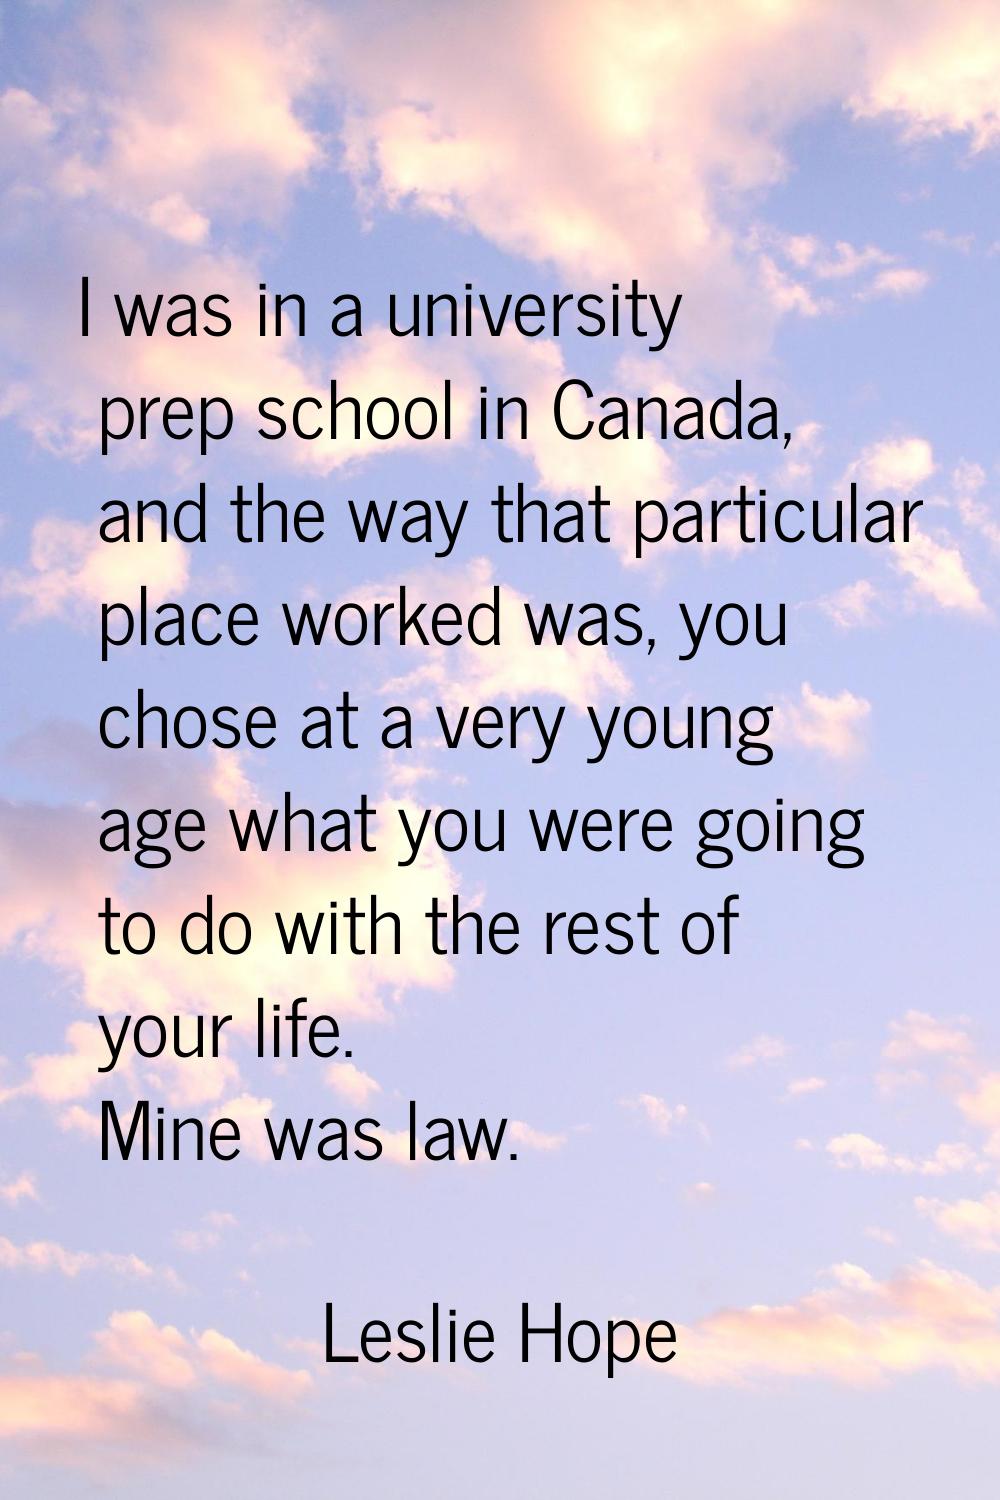 I was in a university prep school in Canada, and the way that particular place worked was, you chos